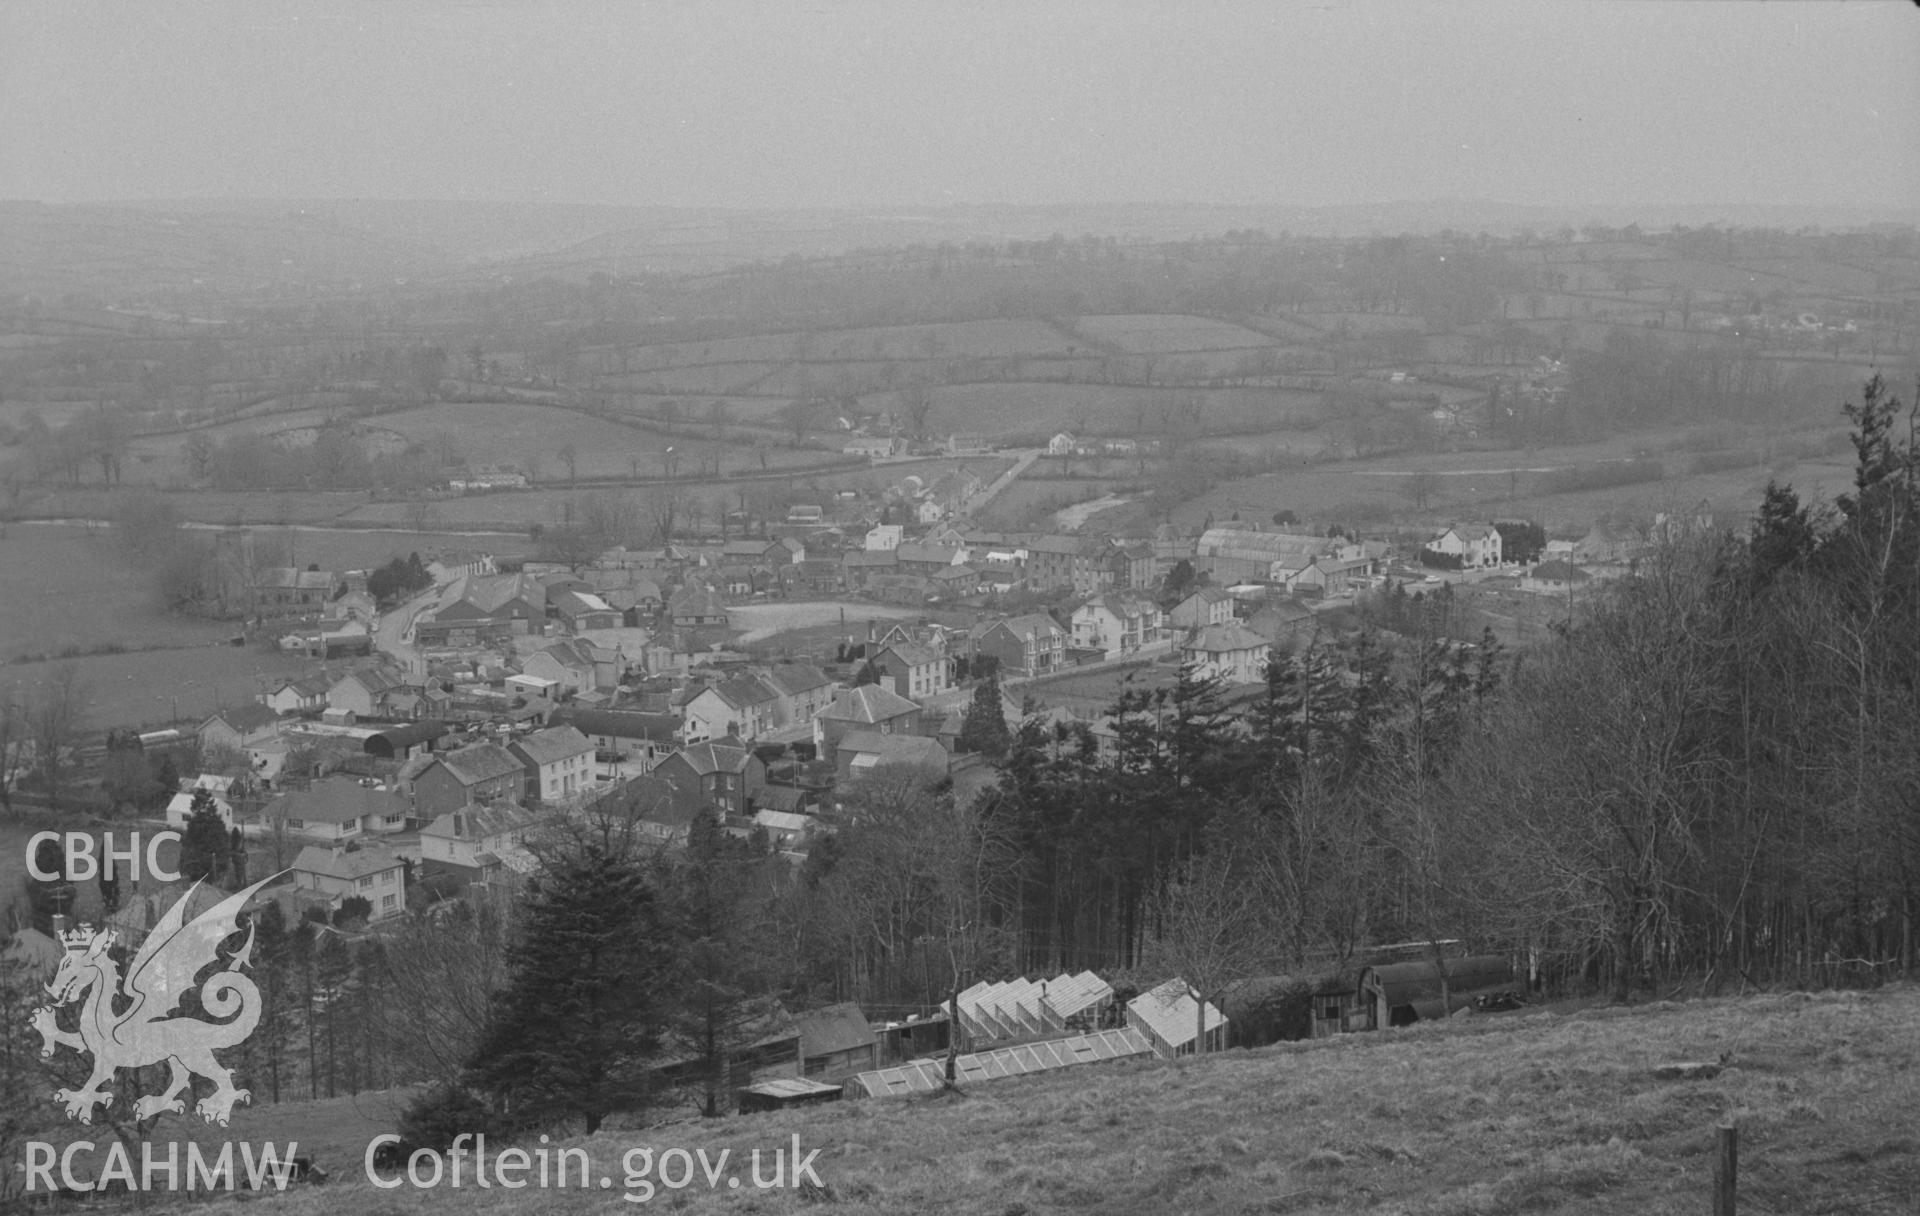 Digital copy of a black and white negative showing view looking from the top of Pen-y-Gaer over Llanybydder; Castell Dol-Wlff across Teifi on right. Photographed by Arthur O. Chater in April 1967 looking north north west from SN 523 434.